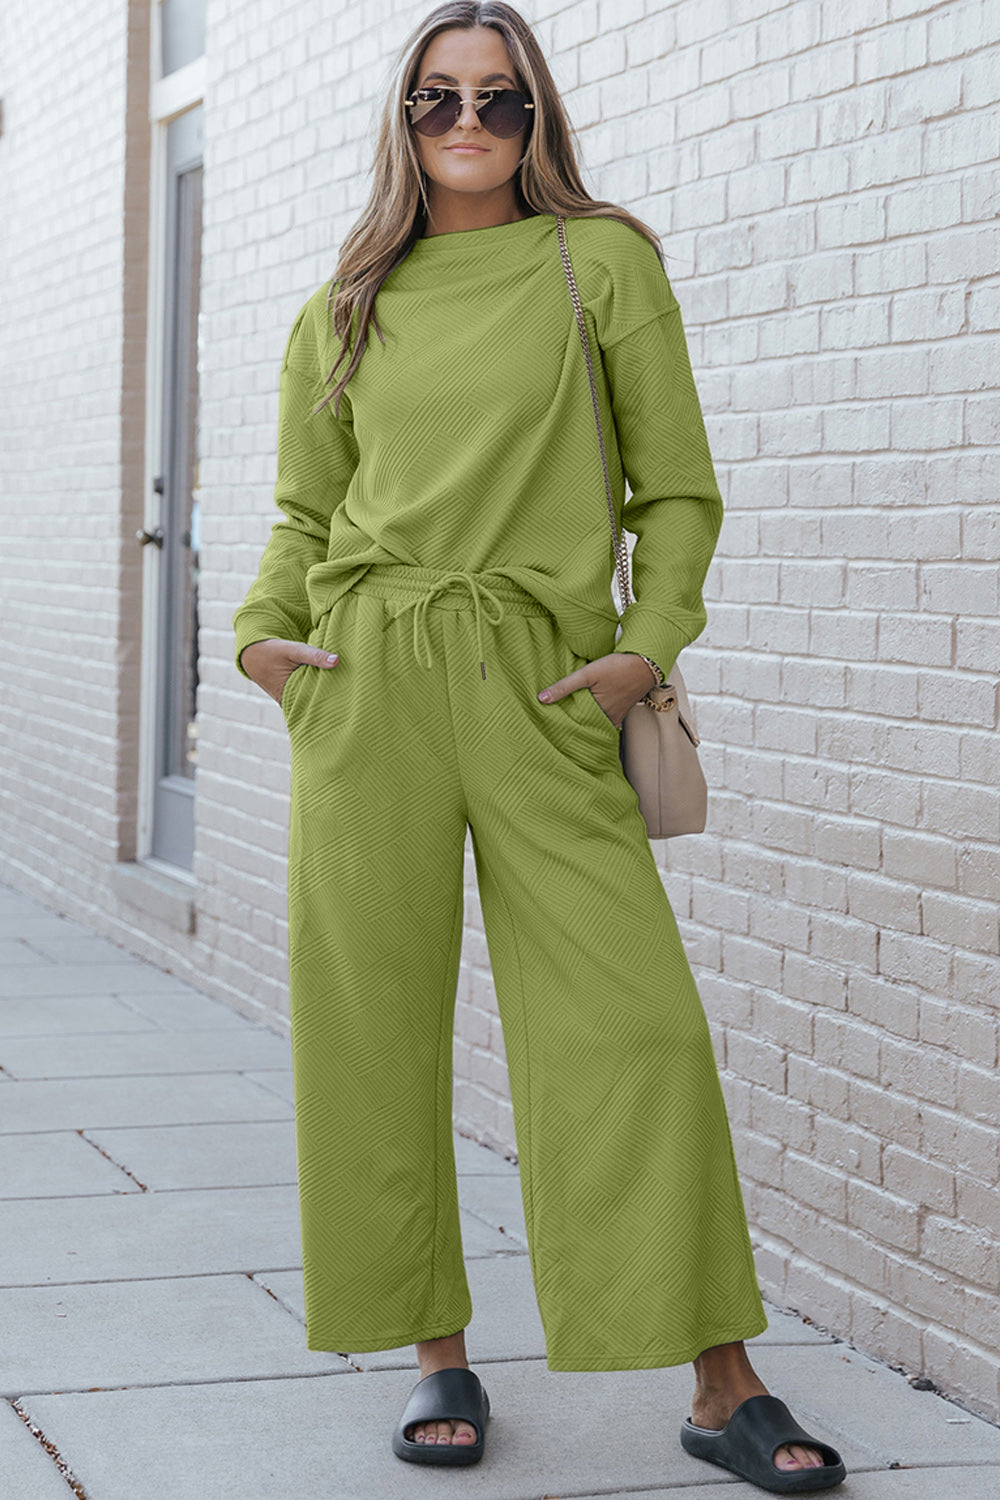 Double Take Full Size Textured Long Sleeve Top and Drawstring Pants Set no  lol